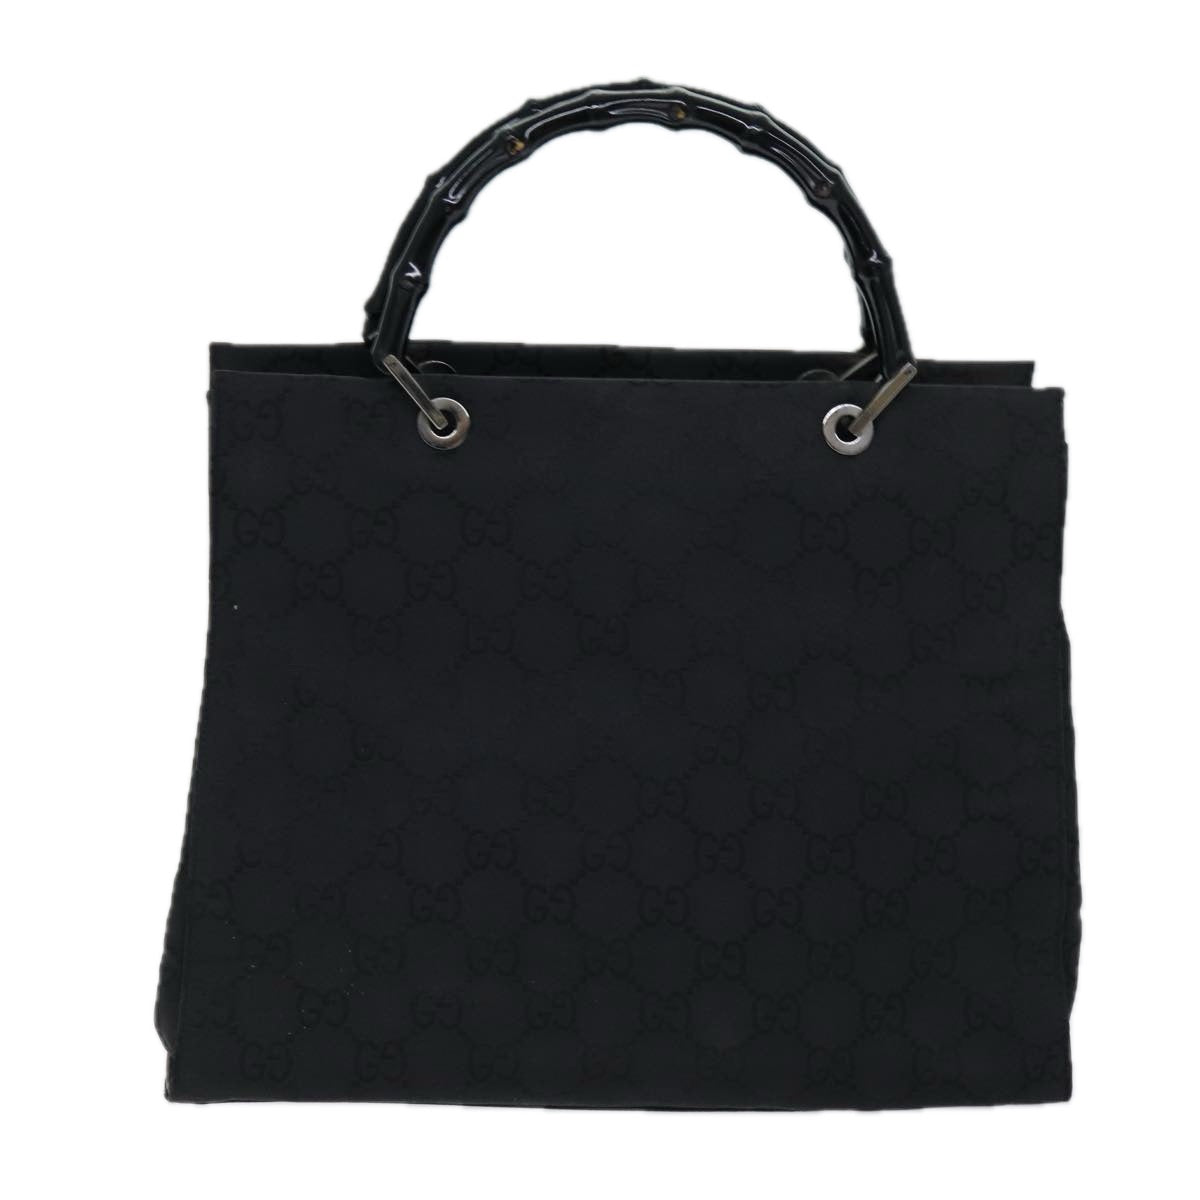 GUCCI Bamboo GG Canvas Hand Bag Black 002 1010 3754 Auth ep4256